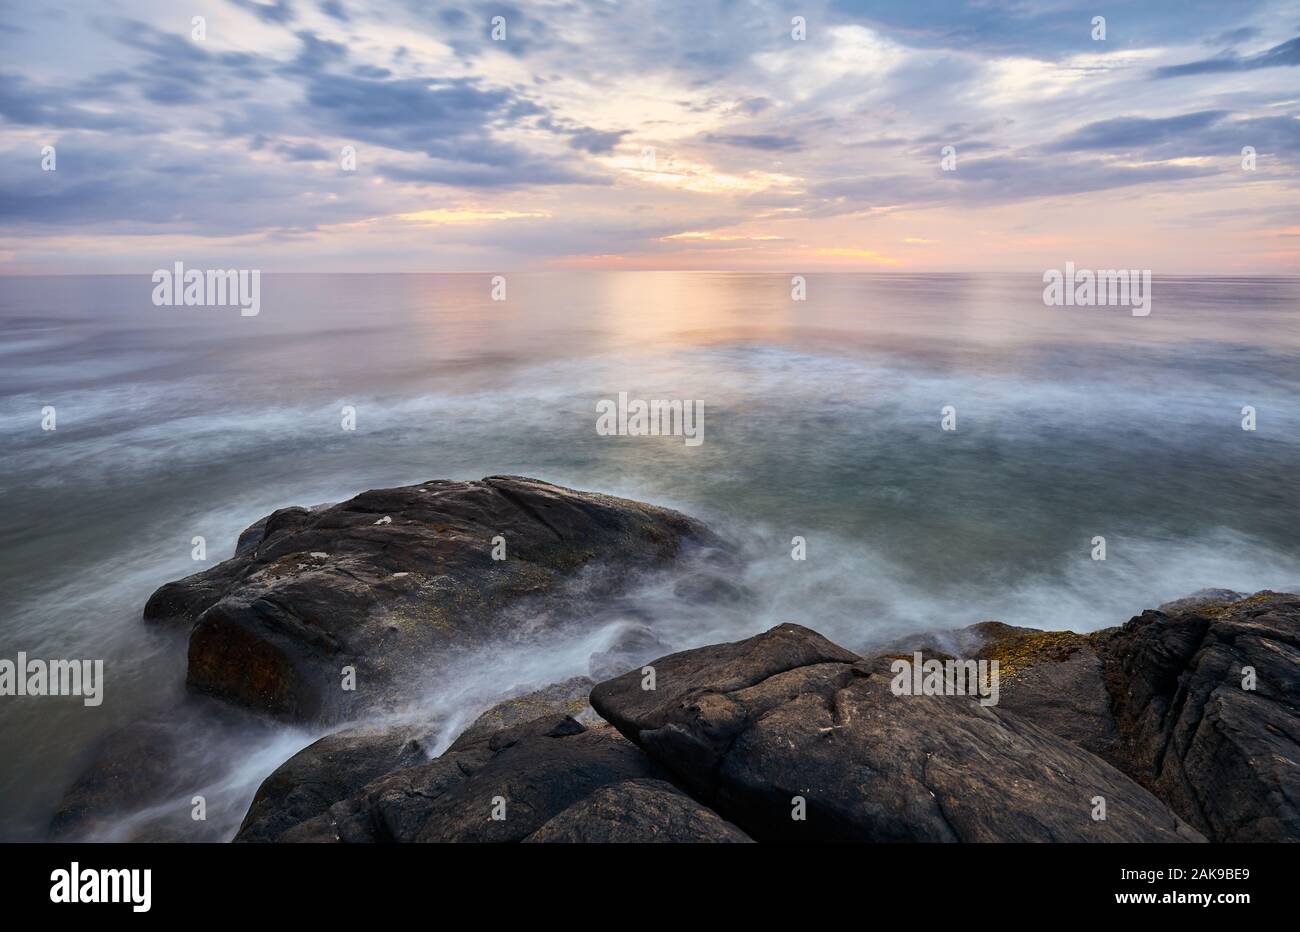 Scenic sunset over water seen from rocky shore, long time exposure, Sri Lanka West Coast. Stock Photo